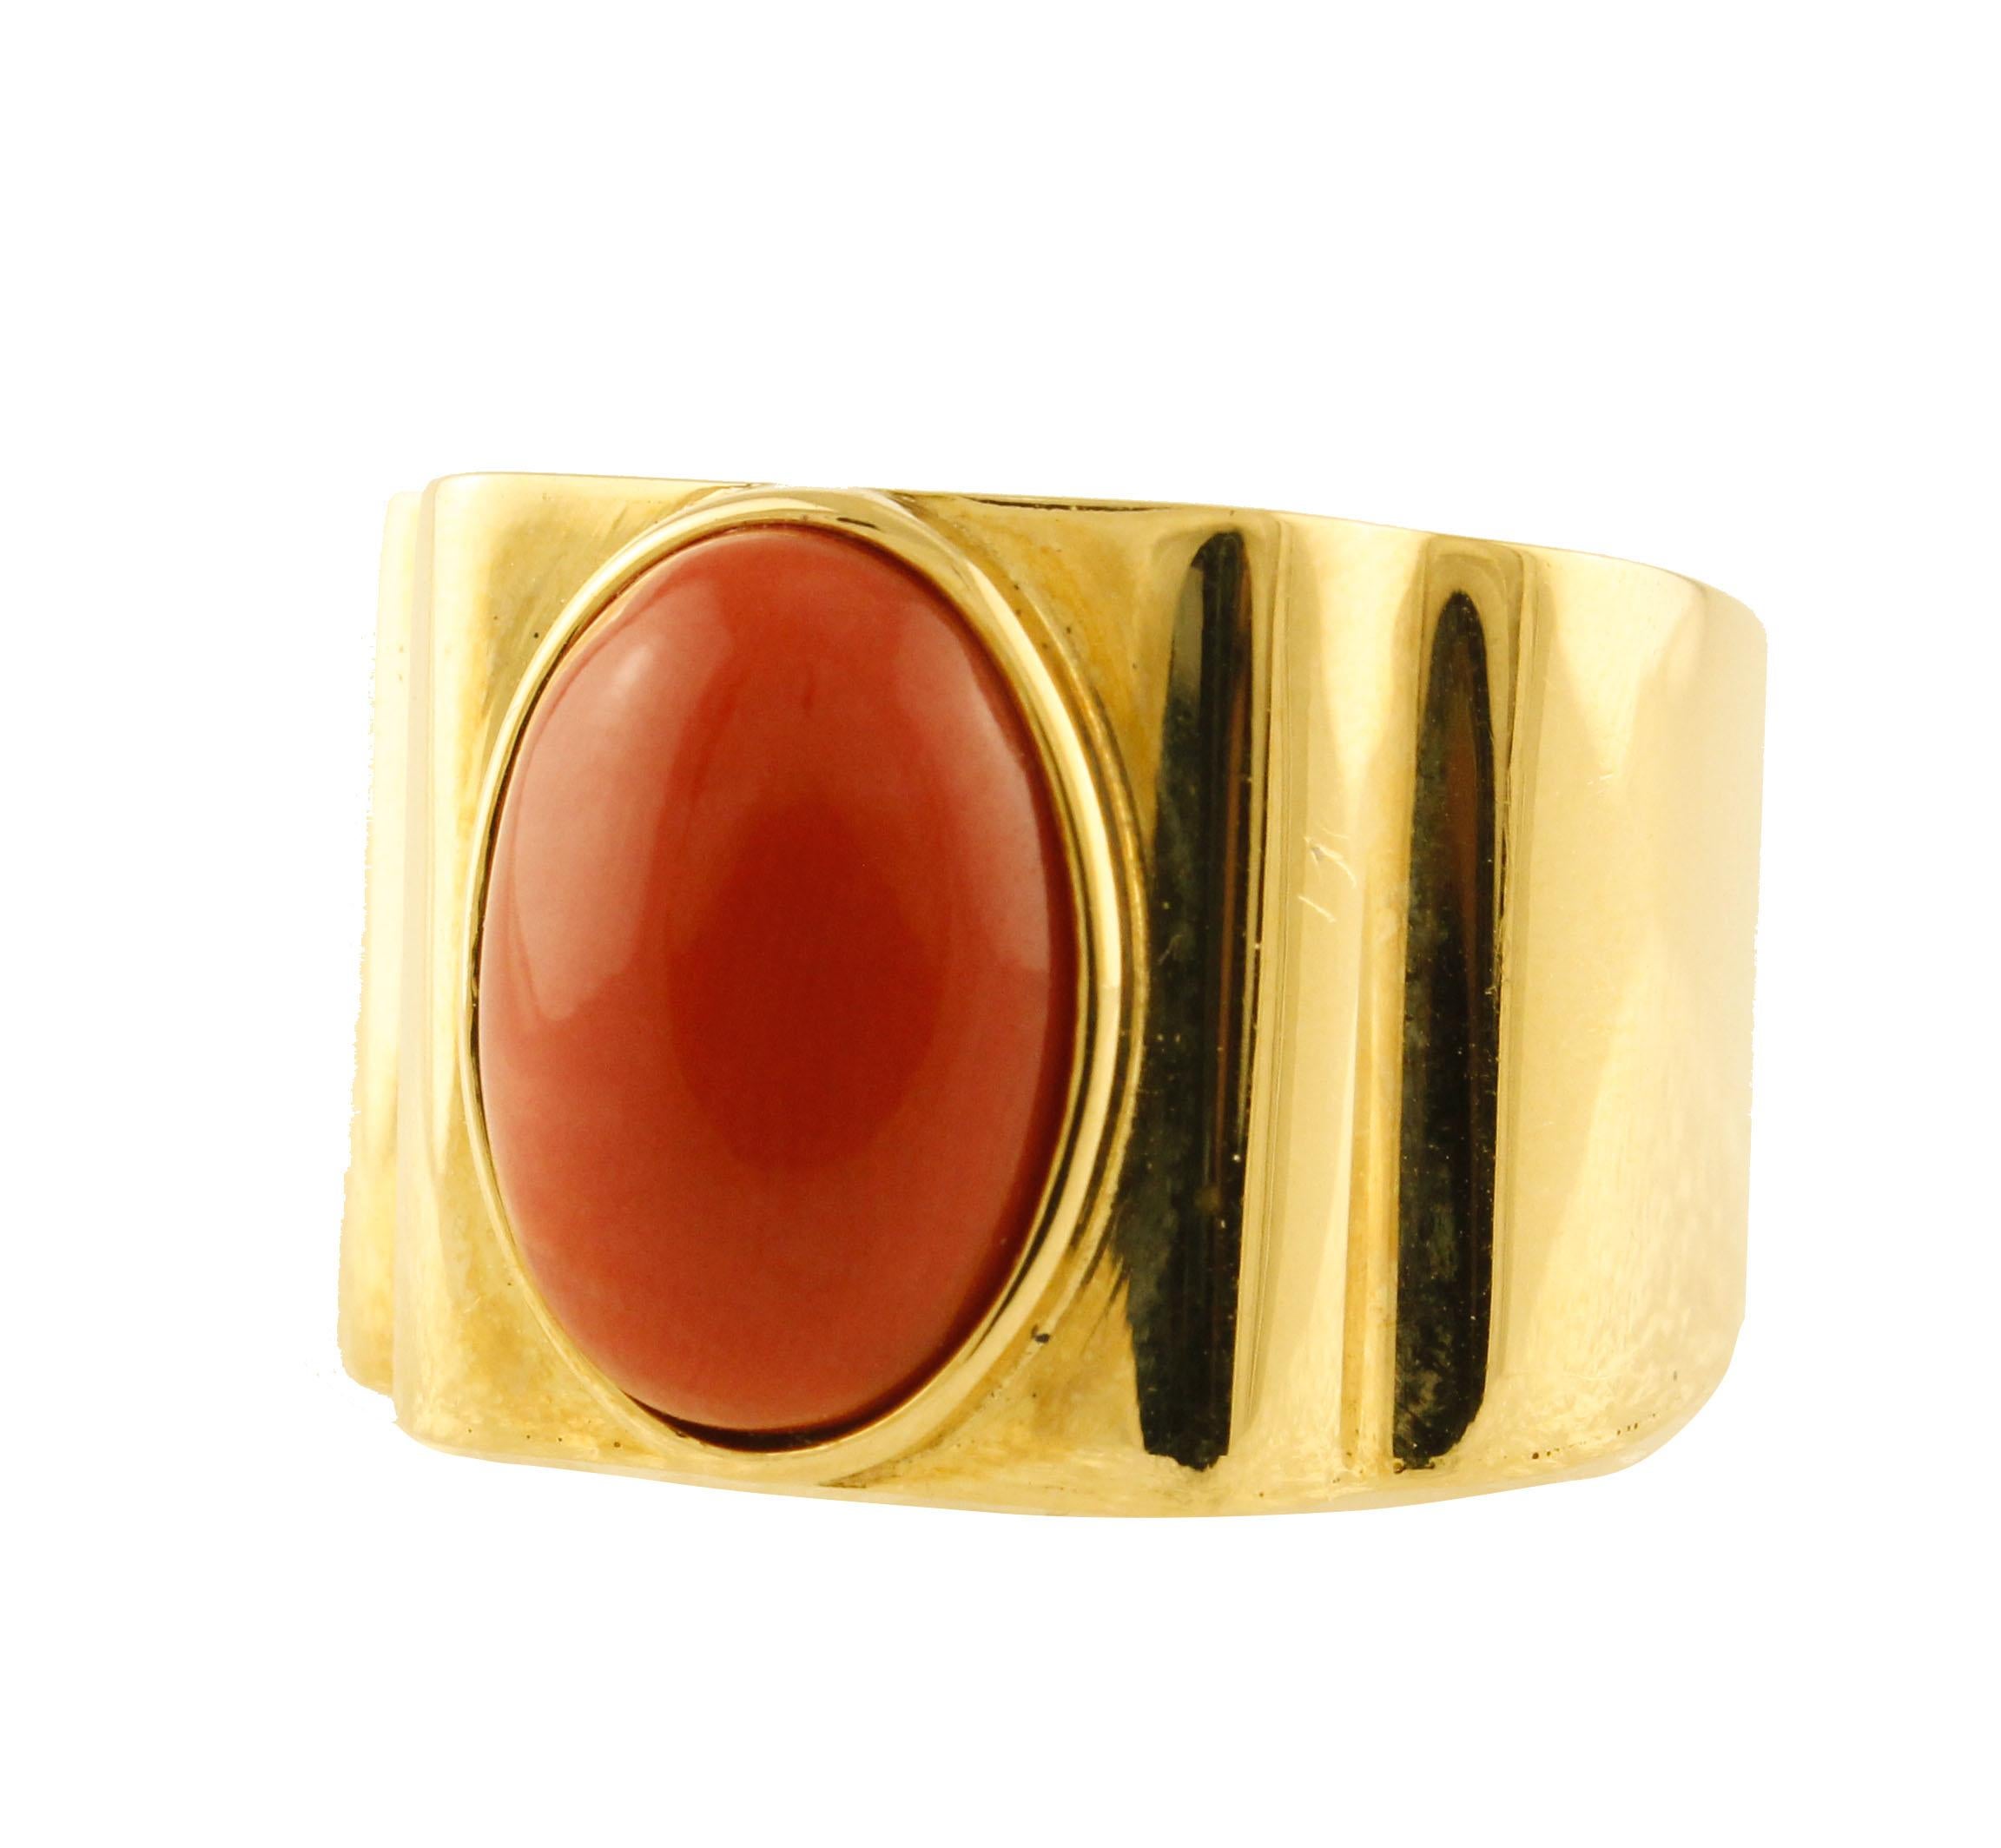 Essential and elegant ring composed by a beautiful red coral oval shape (1.5 cm X 1 cm) in the center mounted on 18K yellow gold structure 
Coral 1.30 g 
Total Weight 11.70 g 
R.F + ugce
K. AFIU,RR
Dimentions 2.3 cm X 1.6 cm 
Italian Size